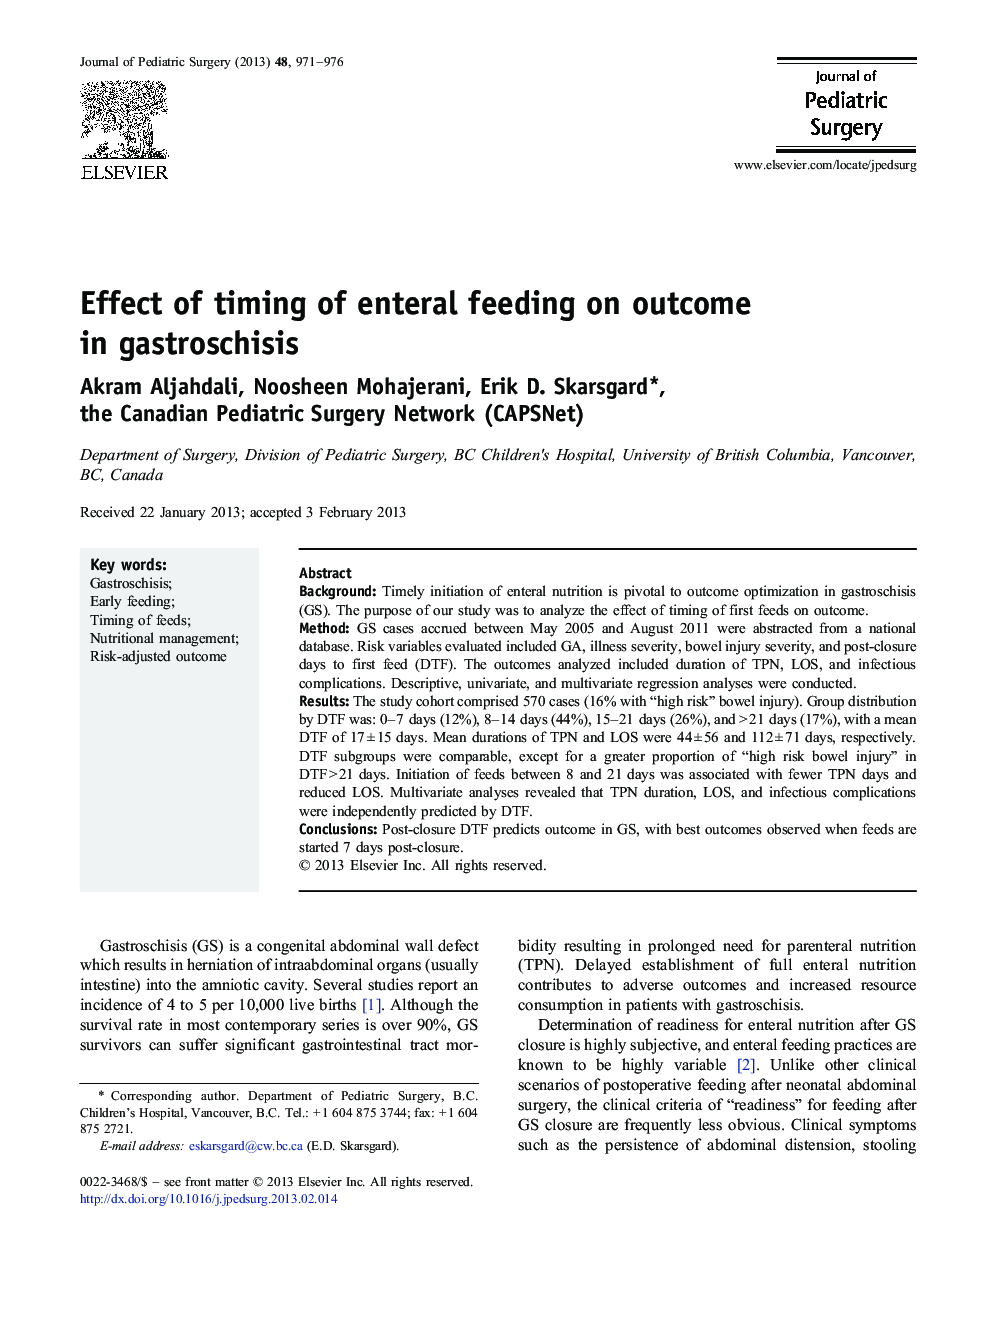 Effect of timing of enteral feeding on outcome in gastroschisis